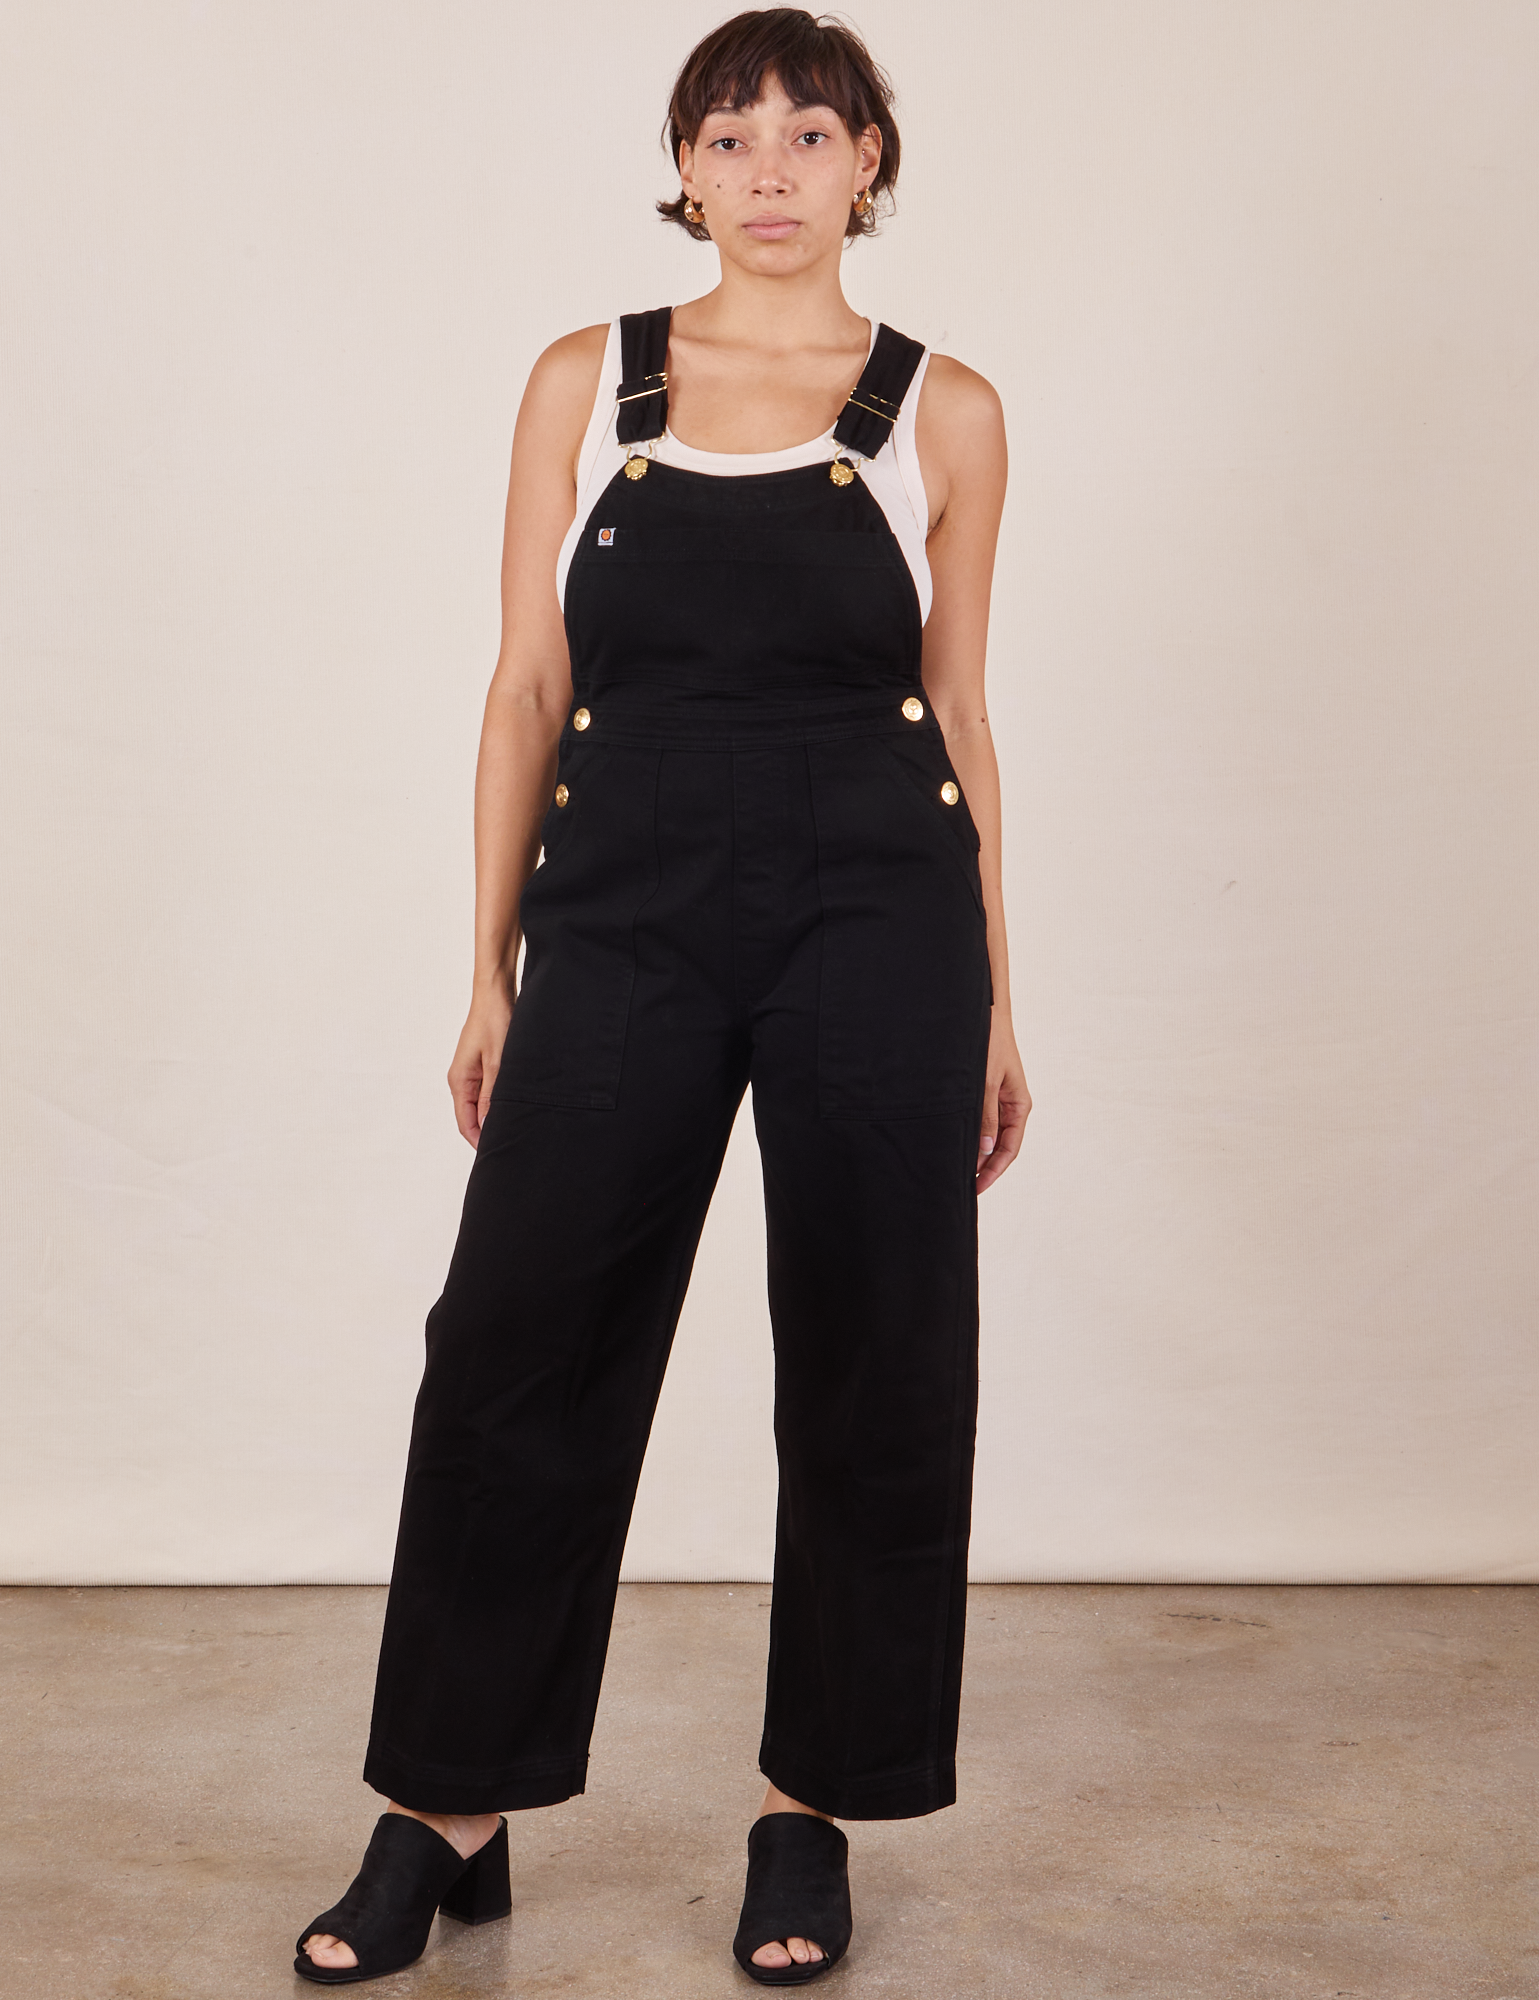 Tiara is 5&#39;4&quot; and wearing size XS Original Overalls in Mono Black with a vintage off-white Cropped Tank Top underneath.